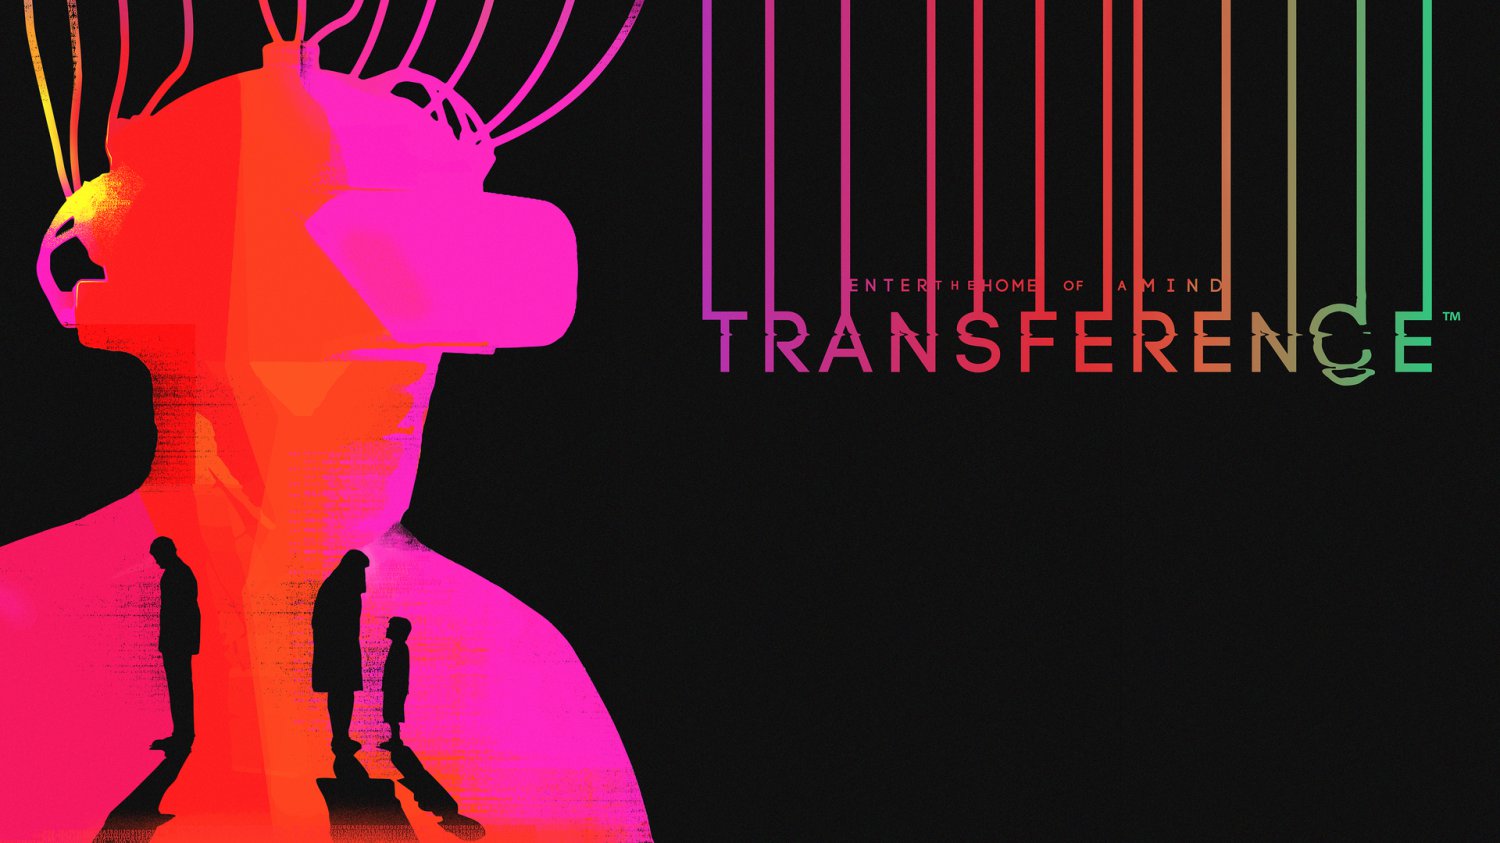 Transference  13"x19" (32cm/49cm) Polyester Fabric Poster